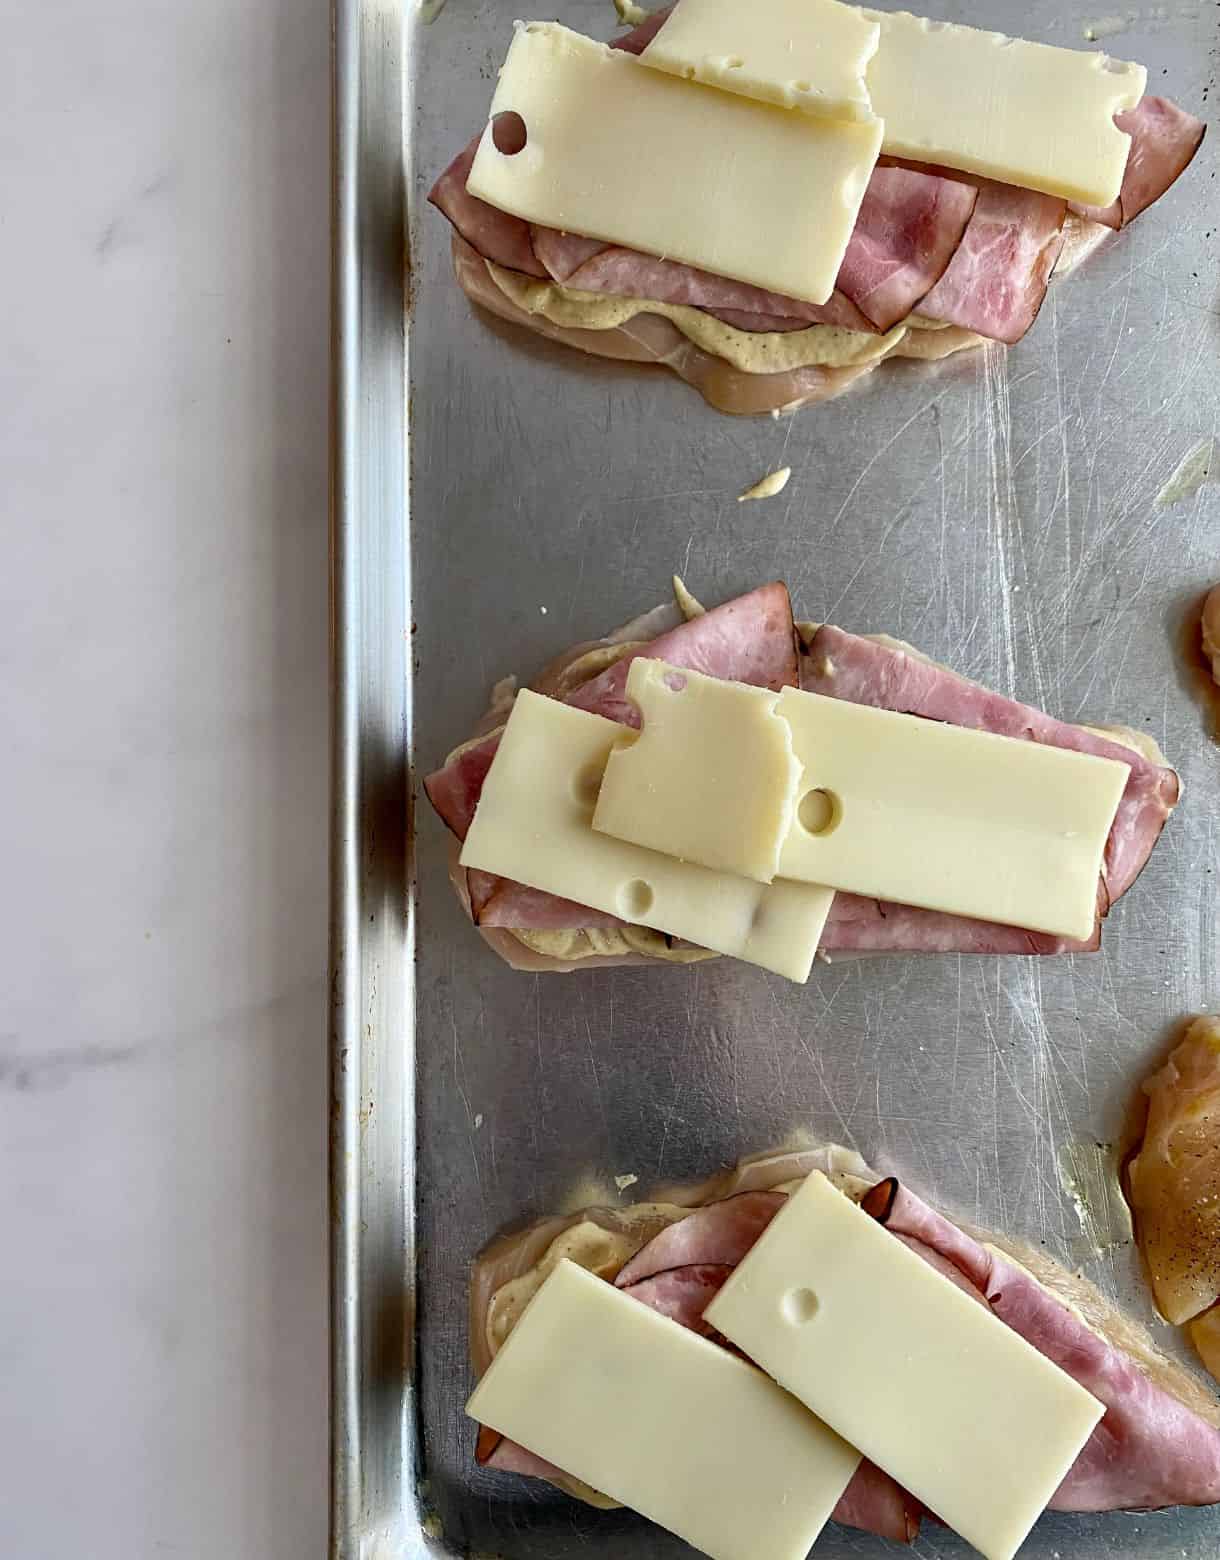 A sheet pan with raw chicken slathered in Dijon sauce, then topped with slices of ham and Swiss cheese.